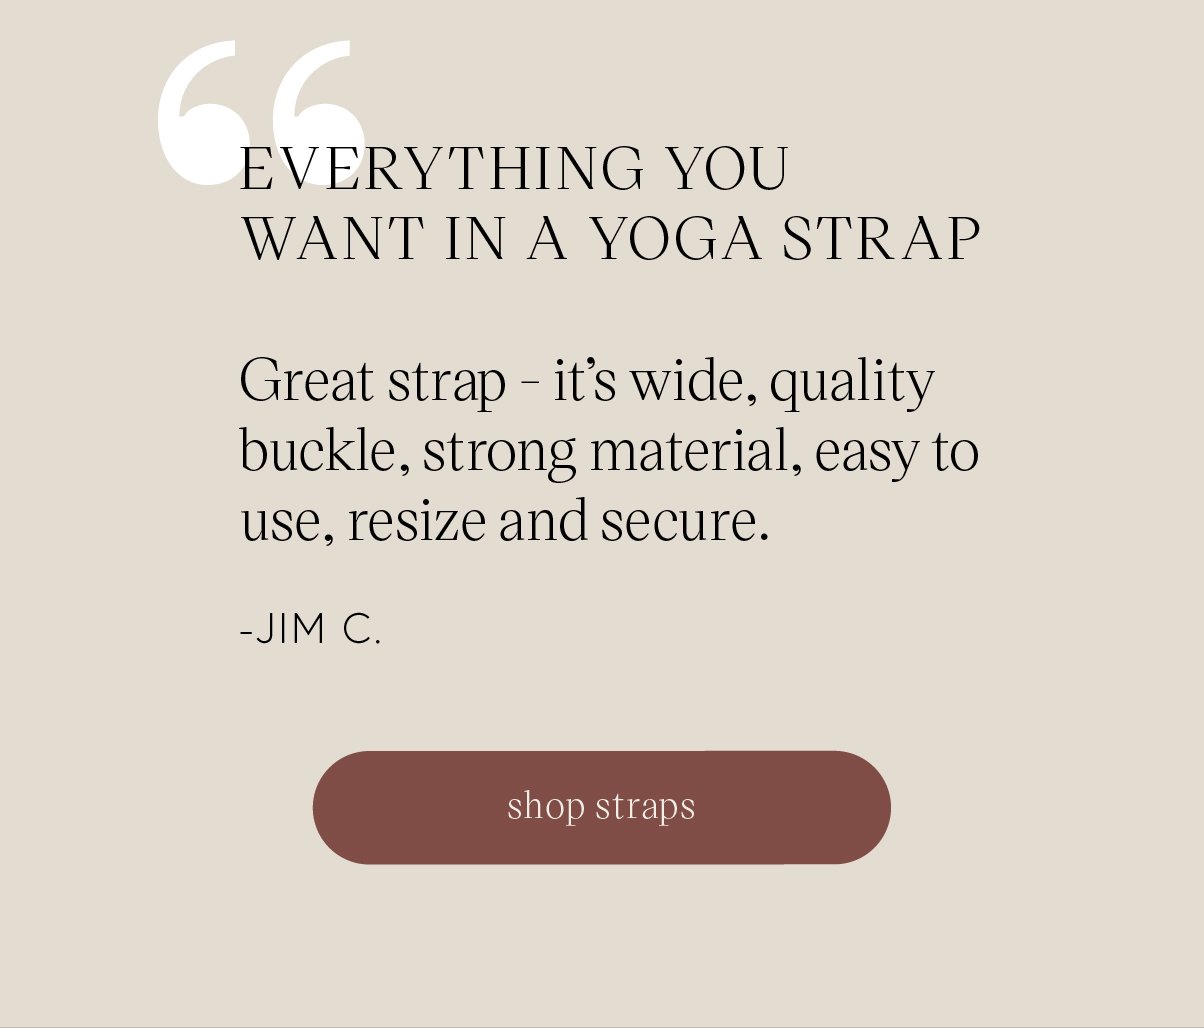 How to use Yoga Straps